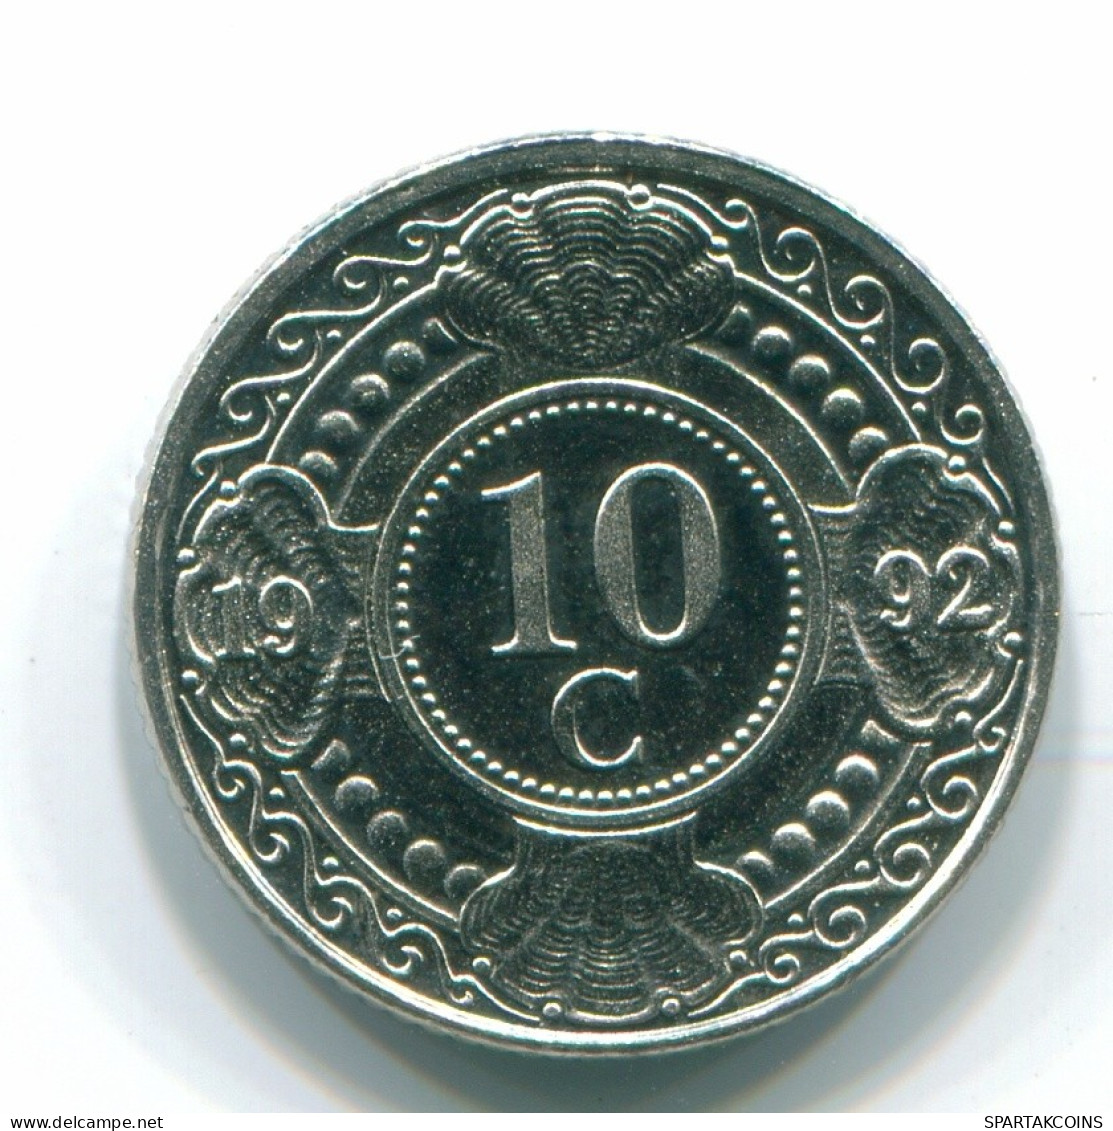 10 CENTS 1992 NETHERLANDS ANTILLES Nickel Colonial Coin #S11356.U.A - Netherlands Antilles